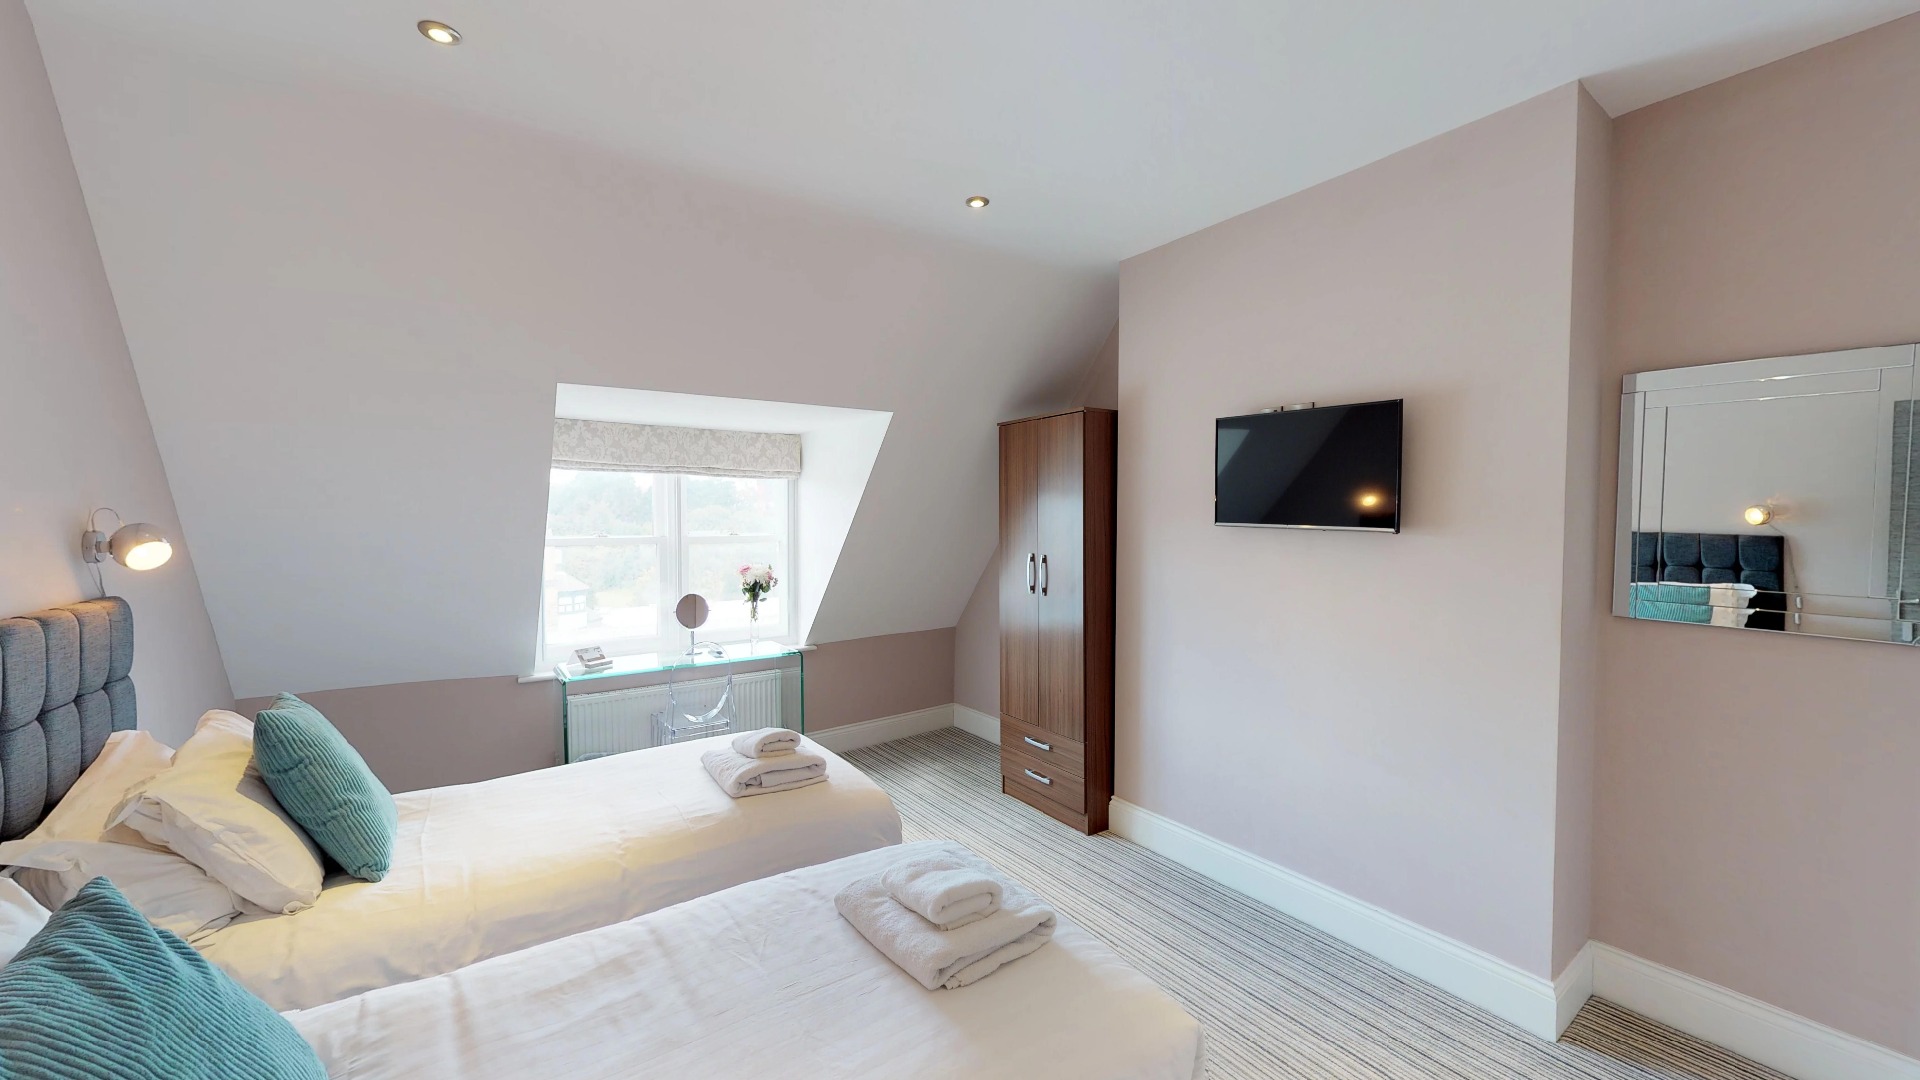 Harrogate Serviced Apartments for business and leisure or relocation to Harrogate